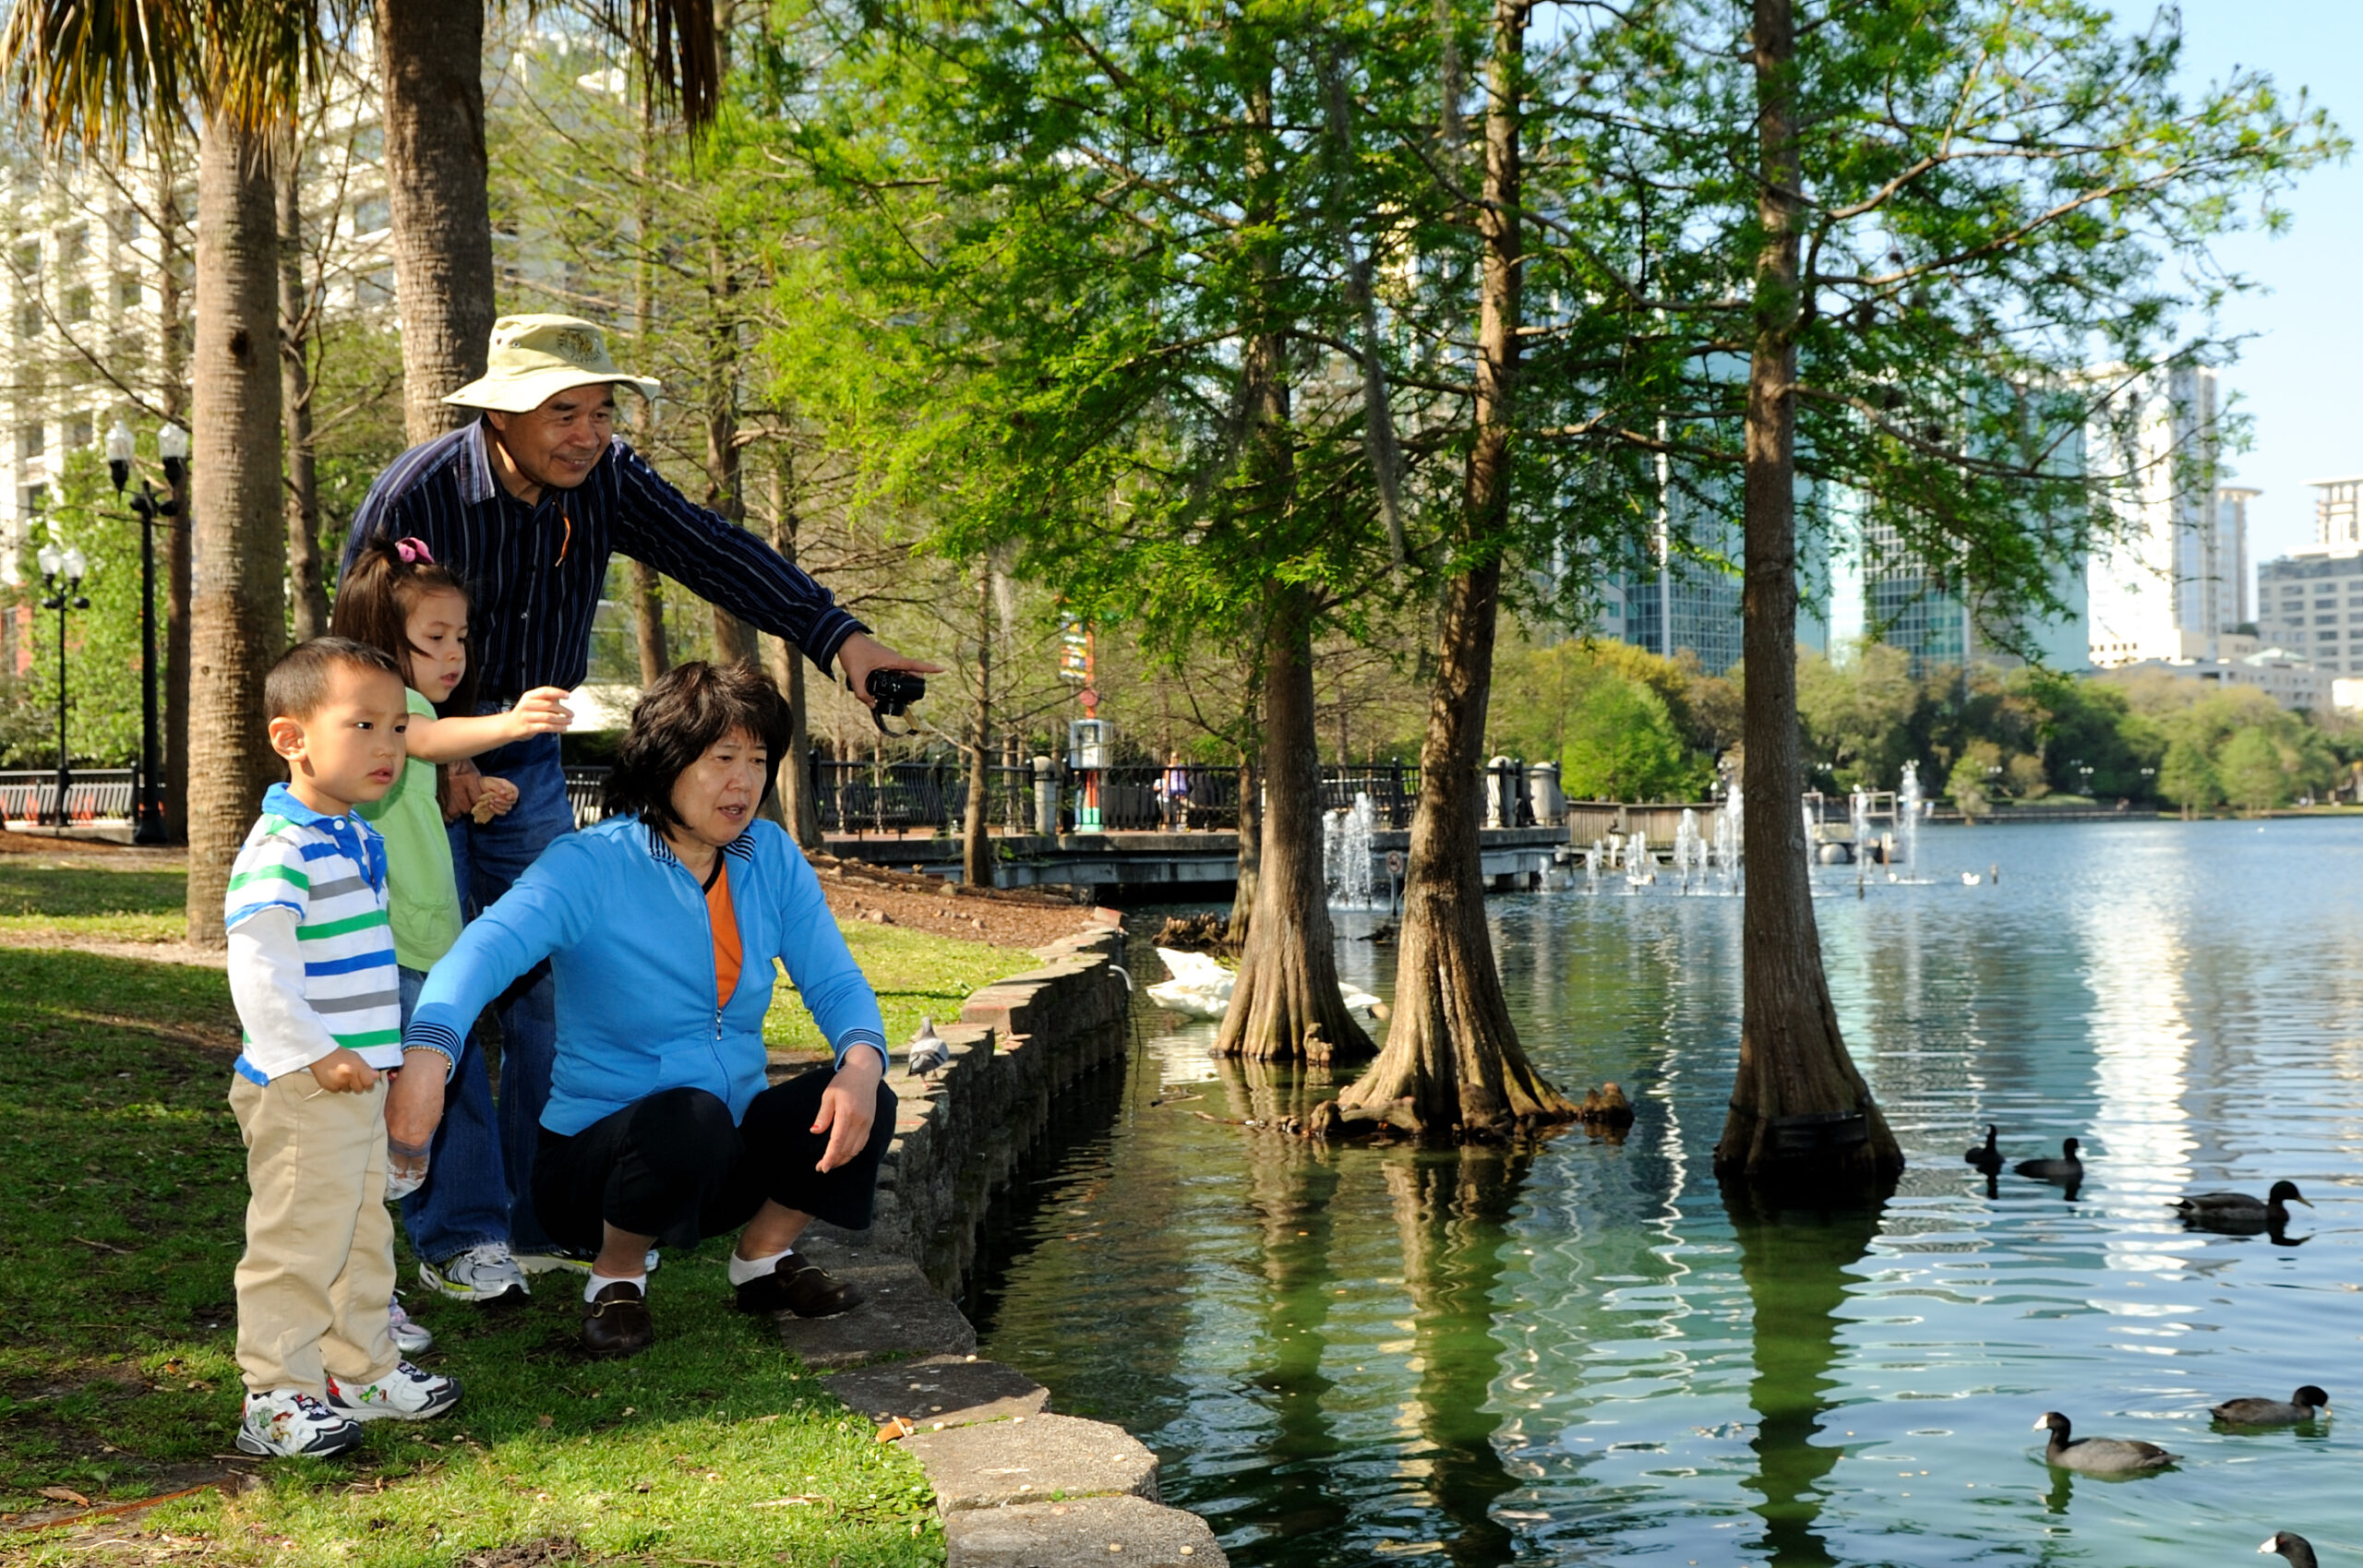 A family is standing near a pond with ducks.